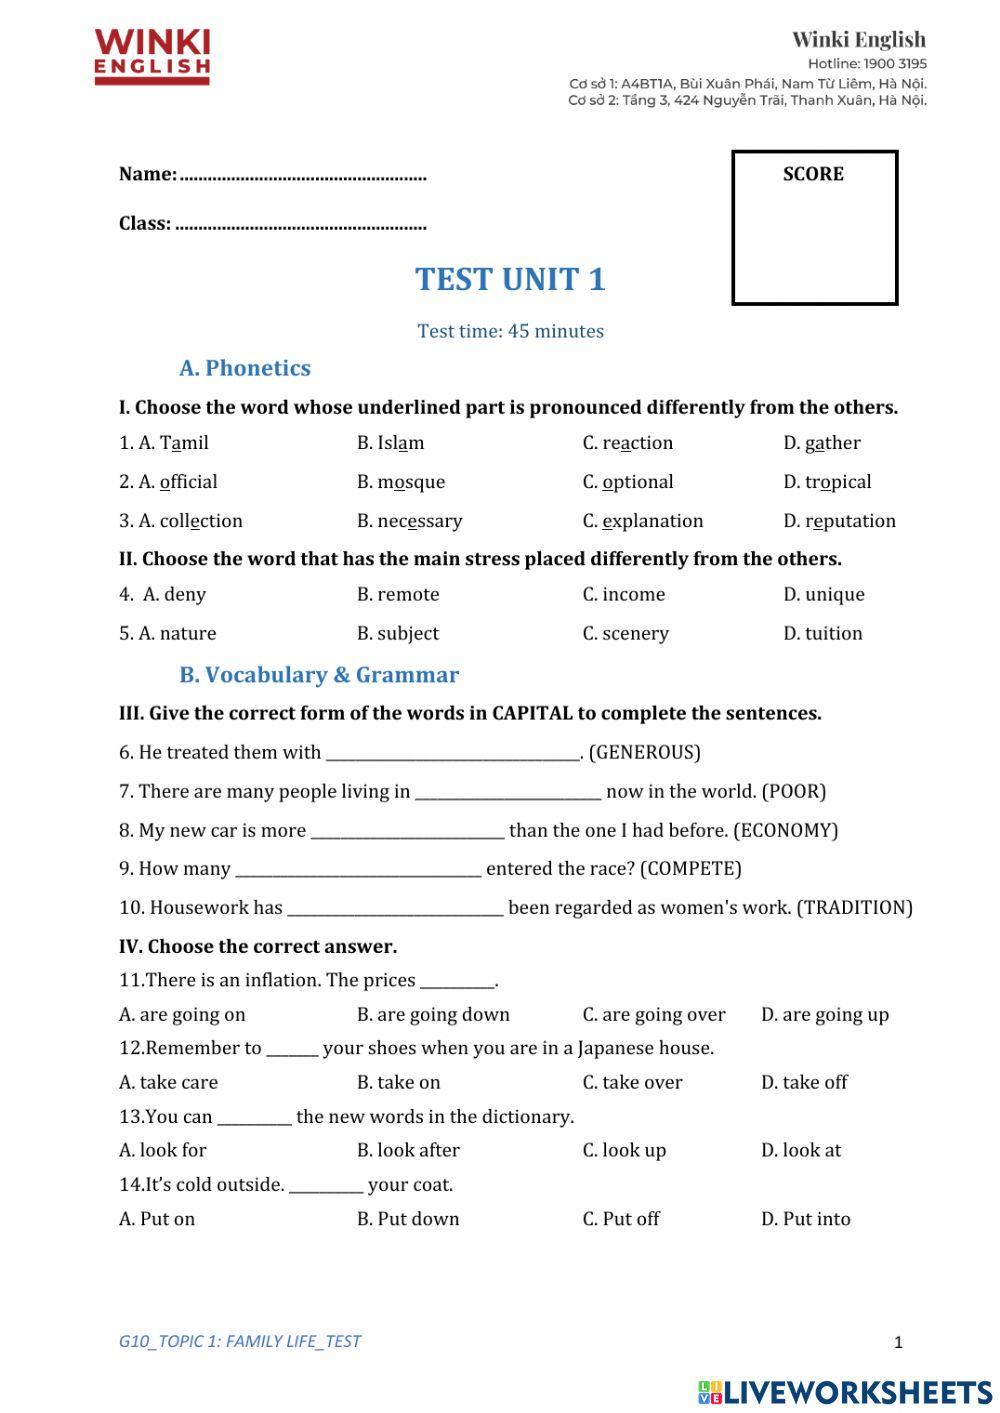 Test 1 - Grade 10 - Family Life and Present Tenses